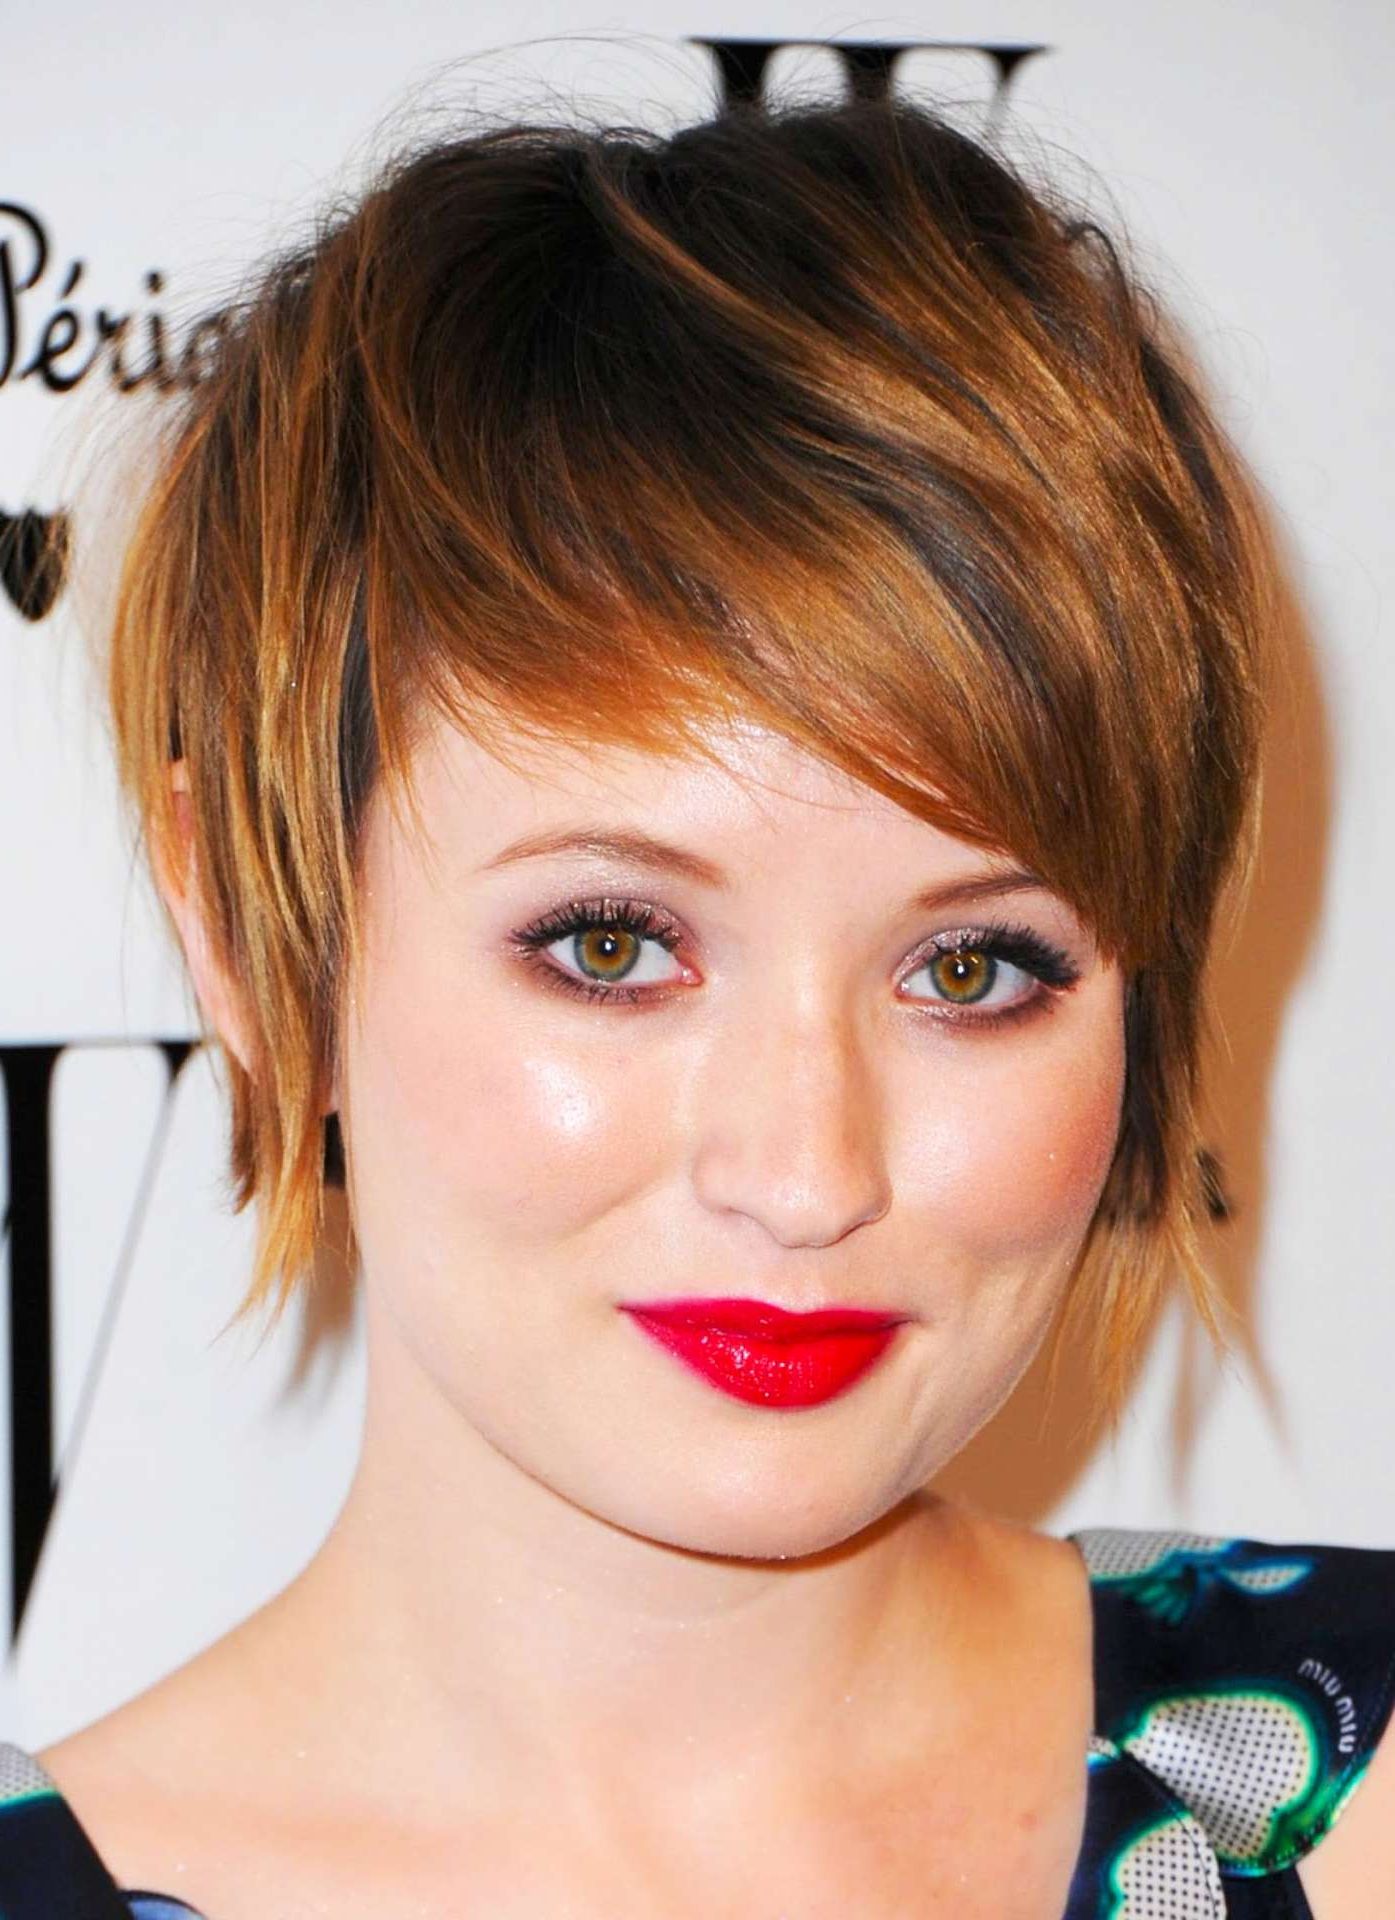 14 Best Short Haircuts For Women With Round Faces Regarding Short Hairstyles For Chubby Cheeks (View 14 of 25)